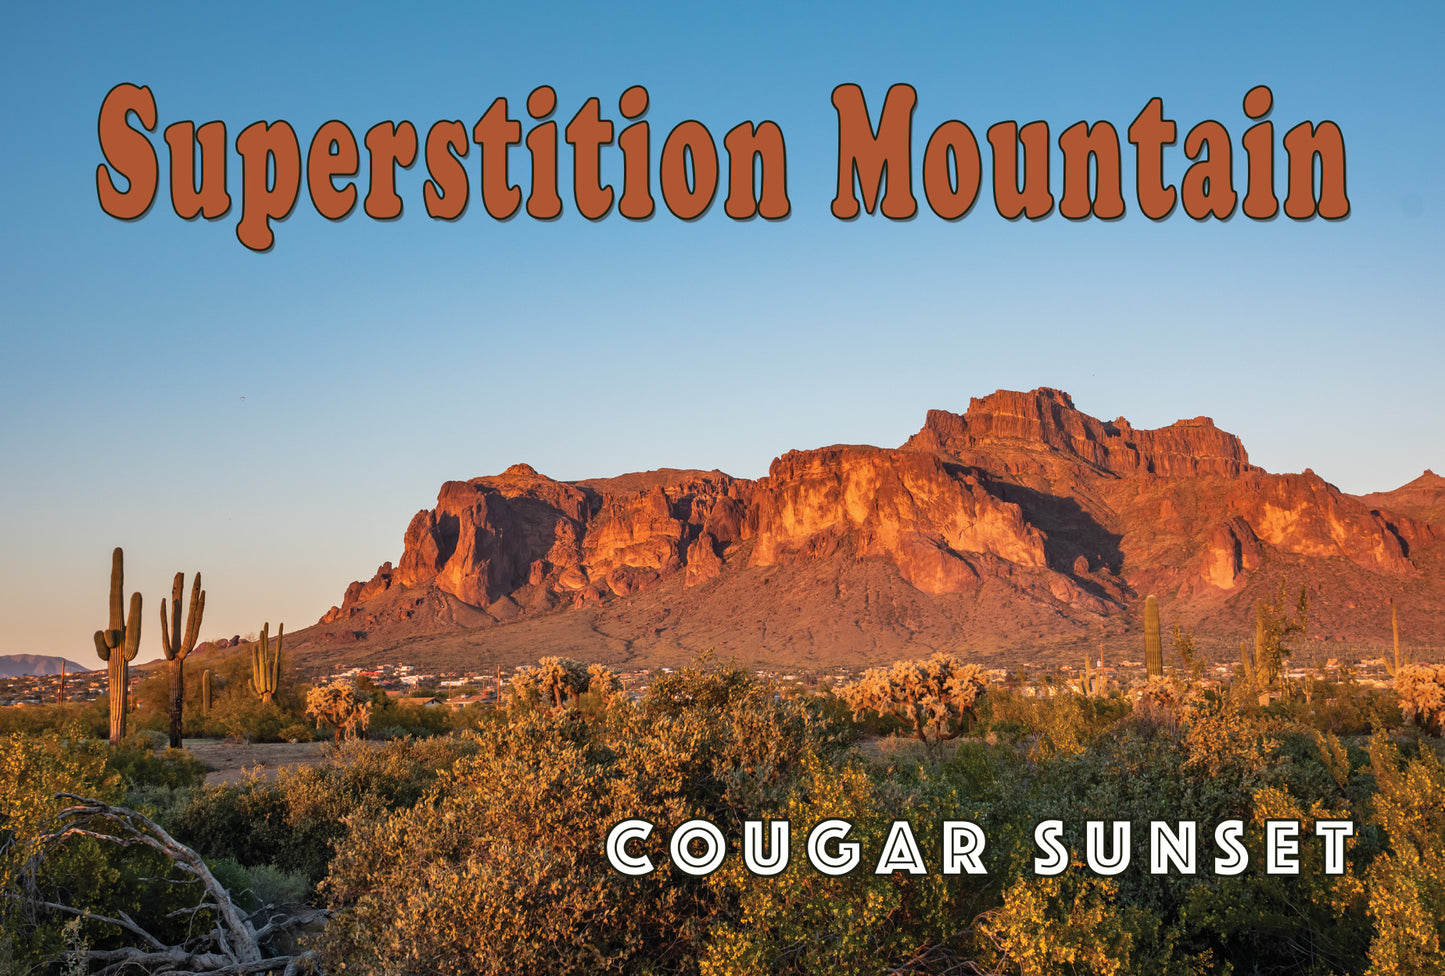 Superstition Mountain Cougar Sunset Postcard